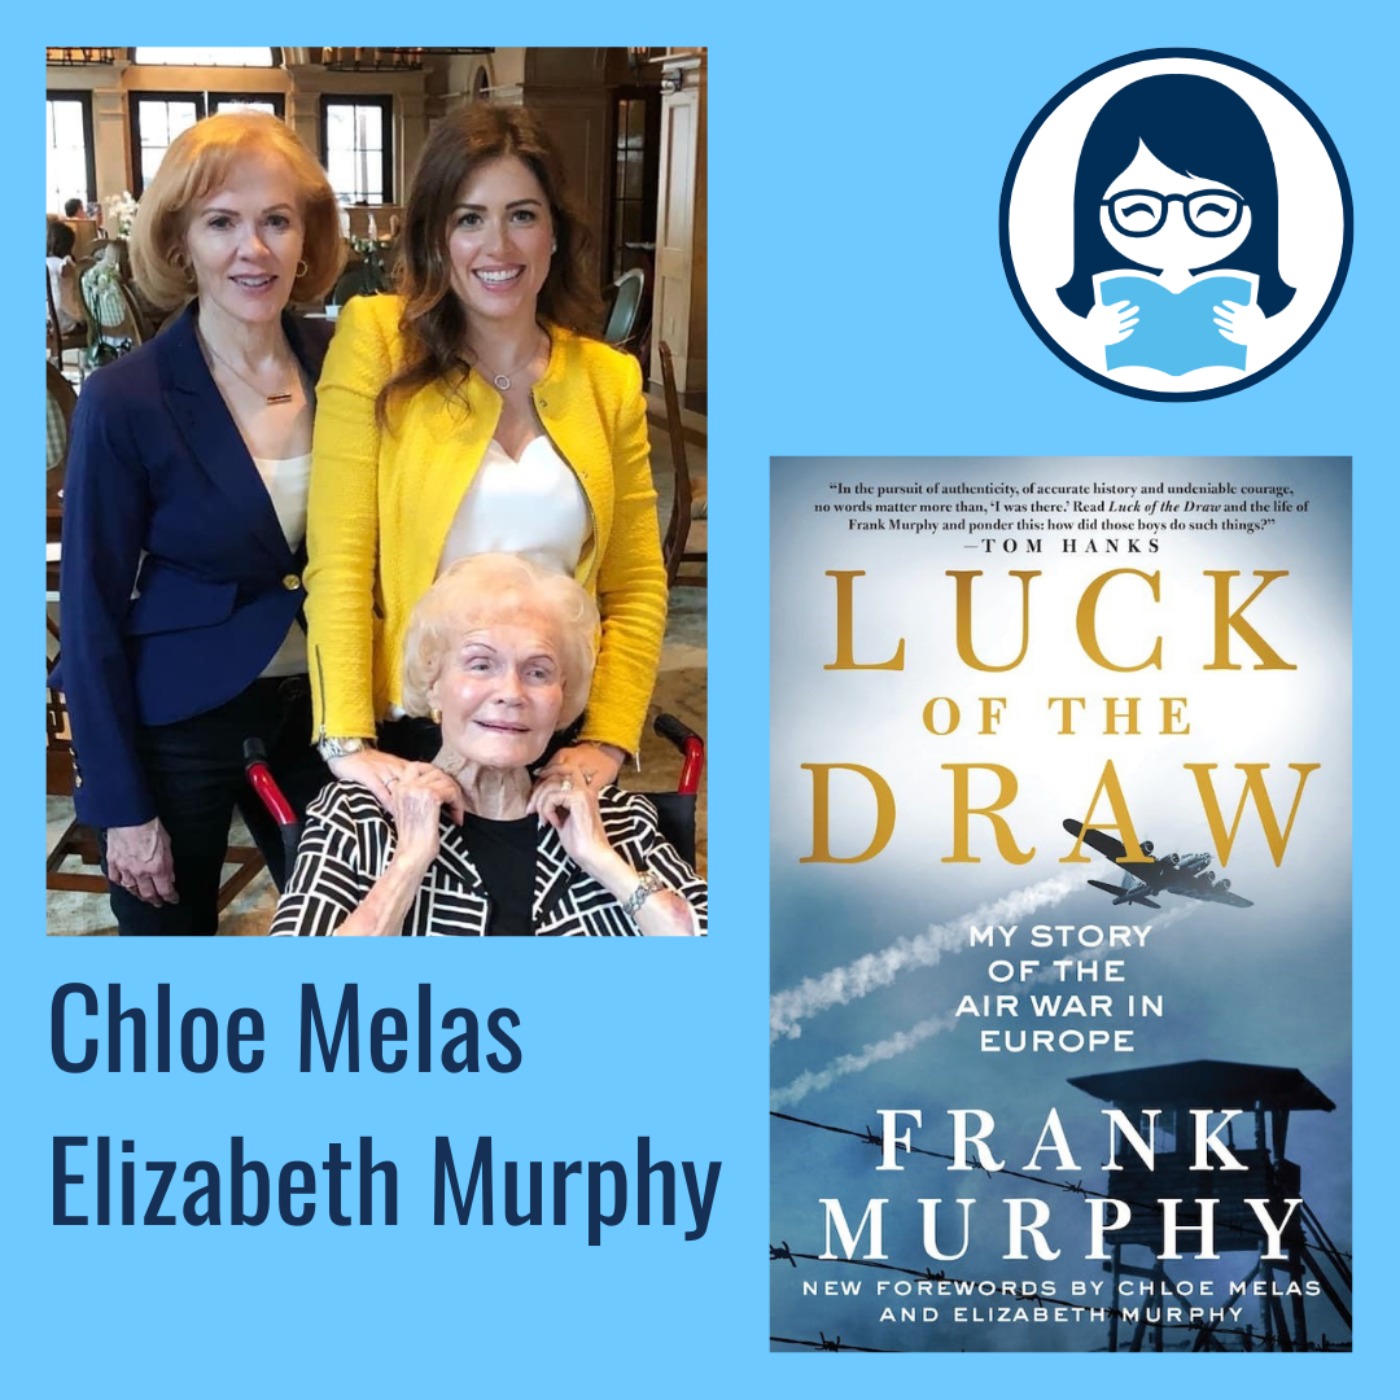 Chloe Melas and Elizabeth Murphy, LUCK OF THE DRAW: My Story of the Air War in Europe